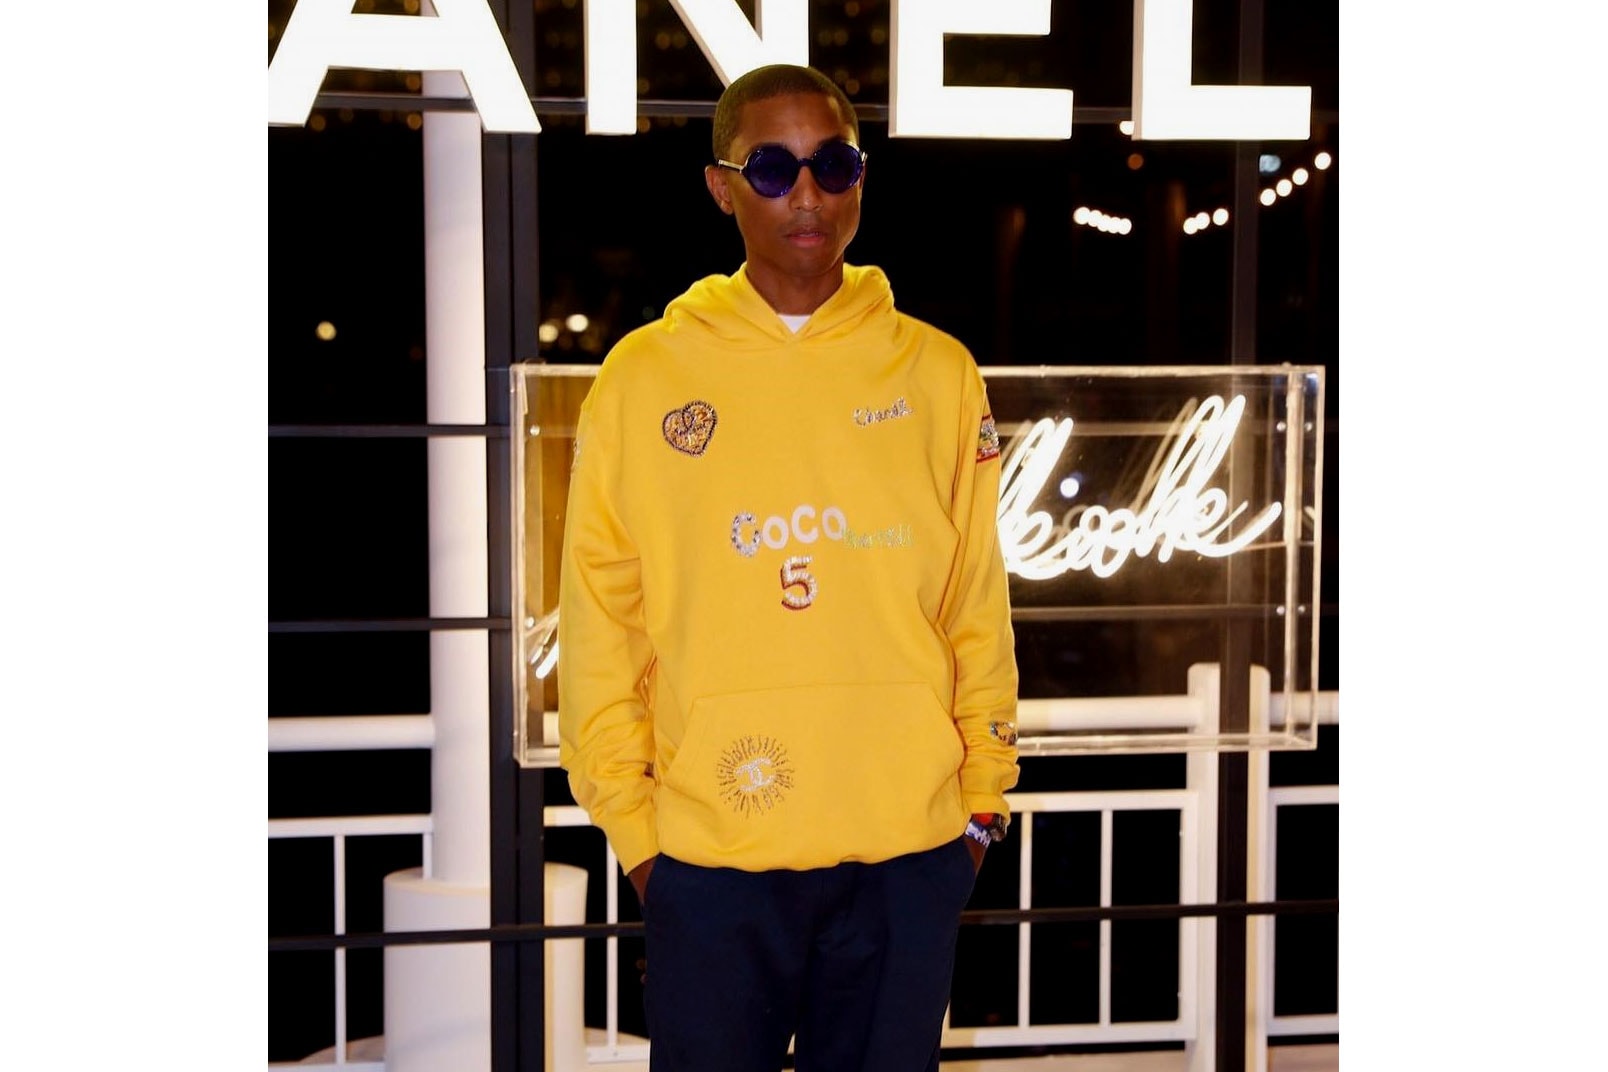 pharrell wlliams chanel collaboration collection cruise 2018 2019 yellow hoodie sweater pullover jumper